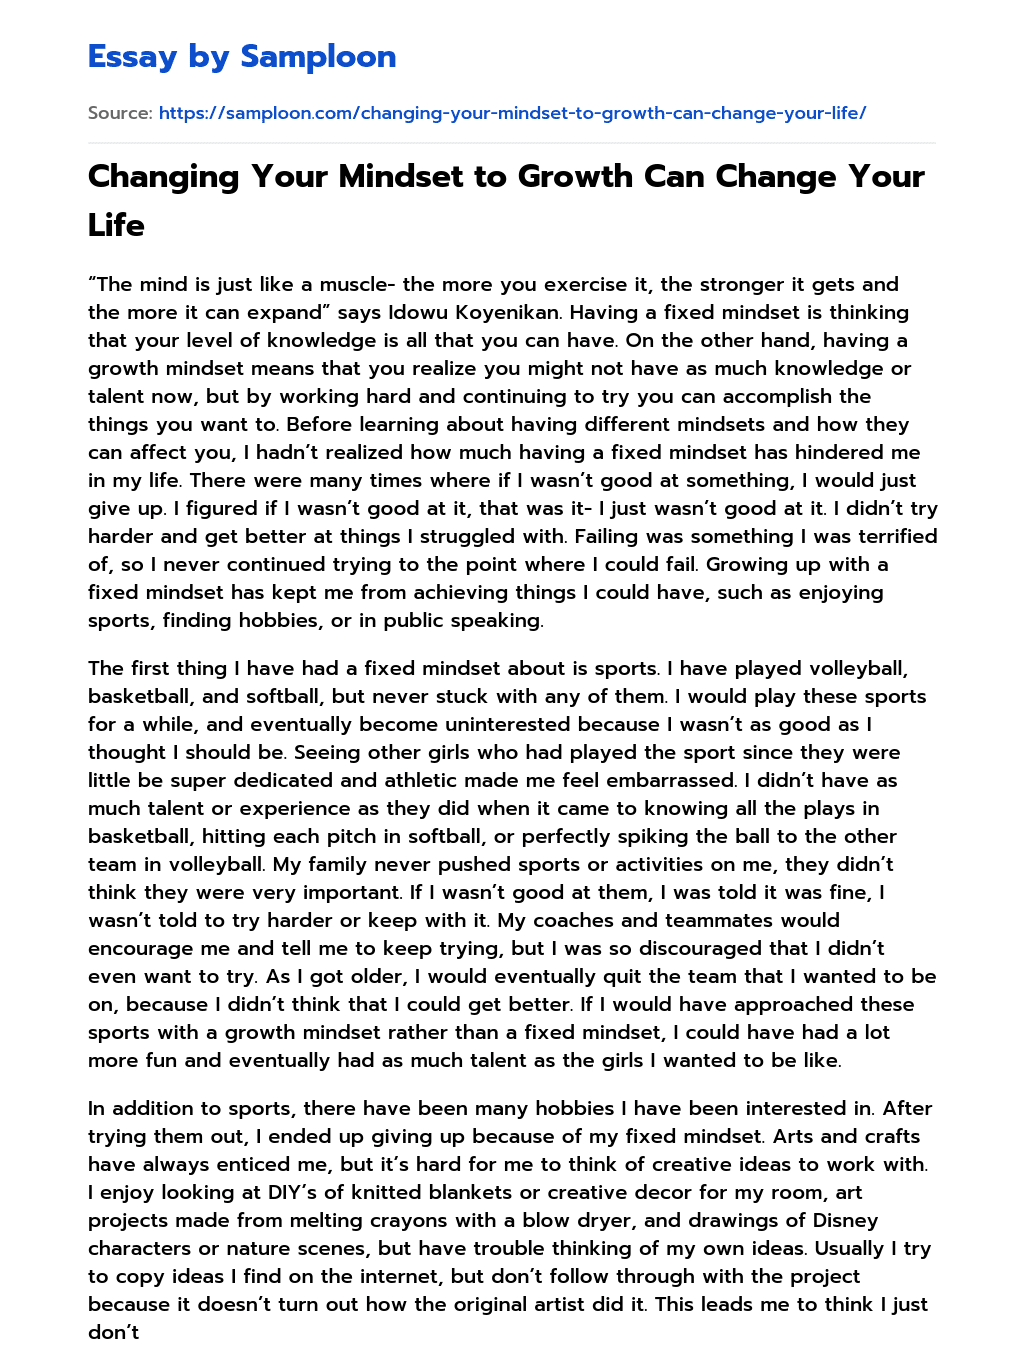 essay about changing your mindset